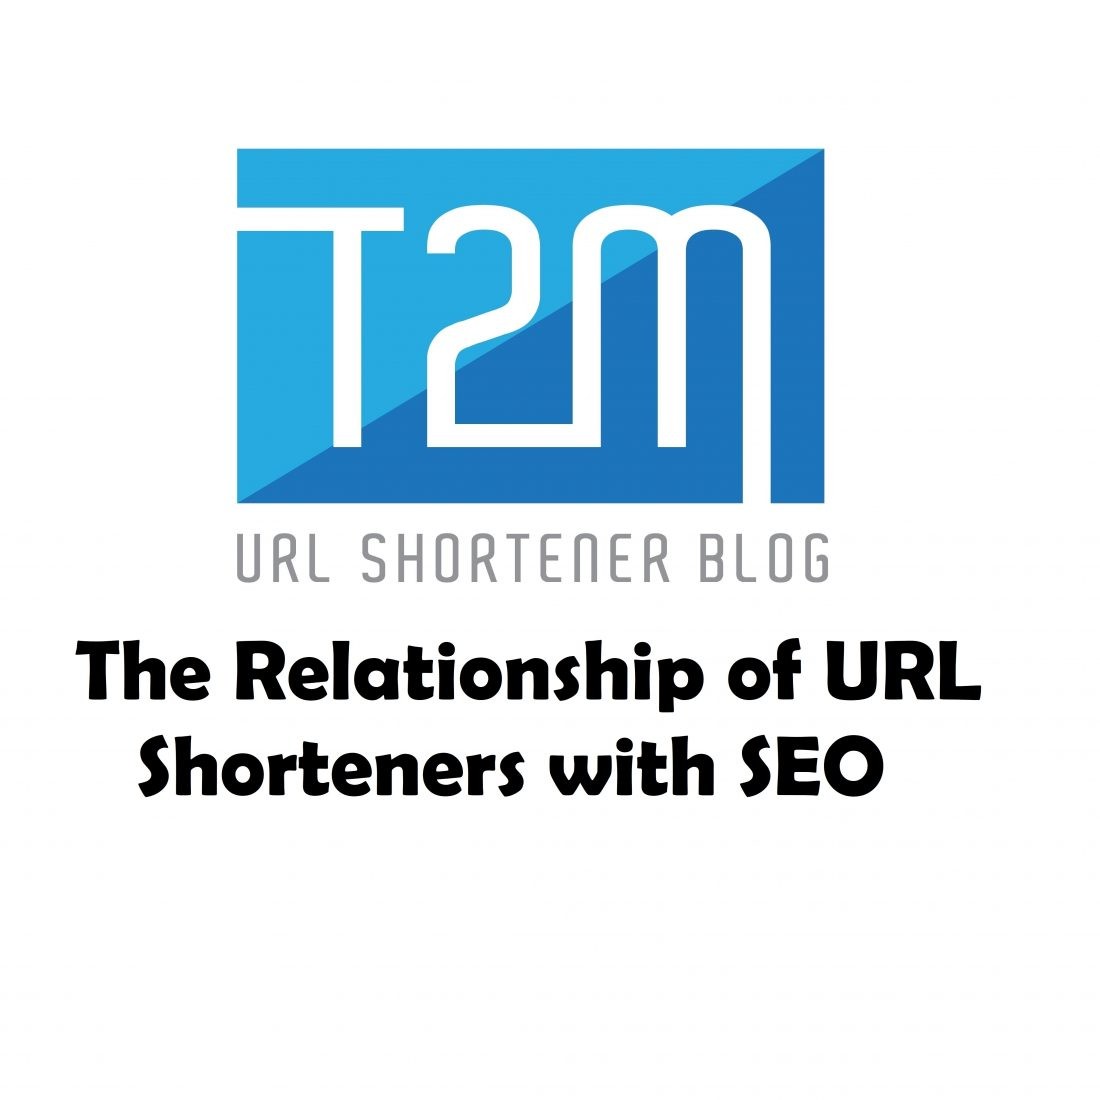 What is the Relationship of URL Shorteners with SEO?